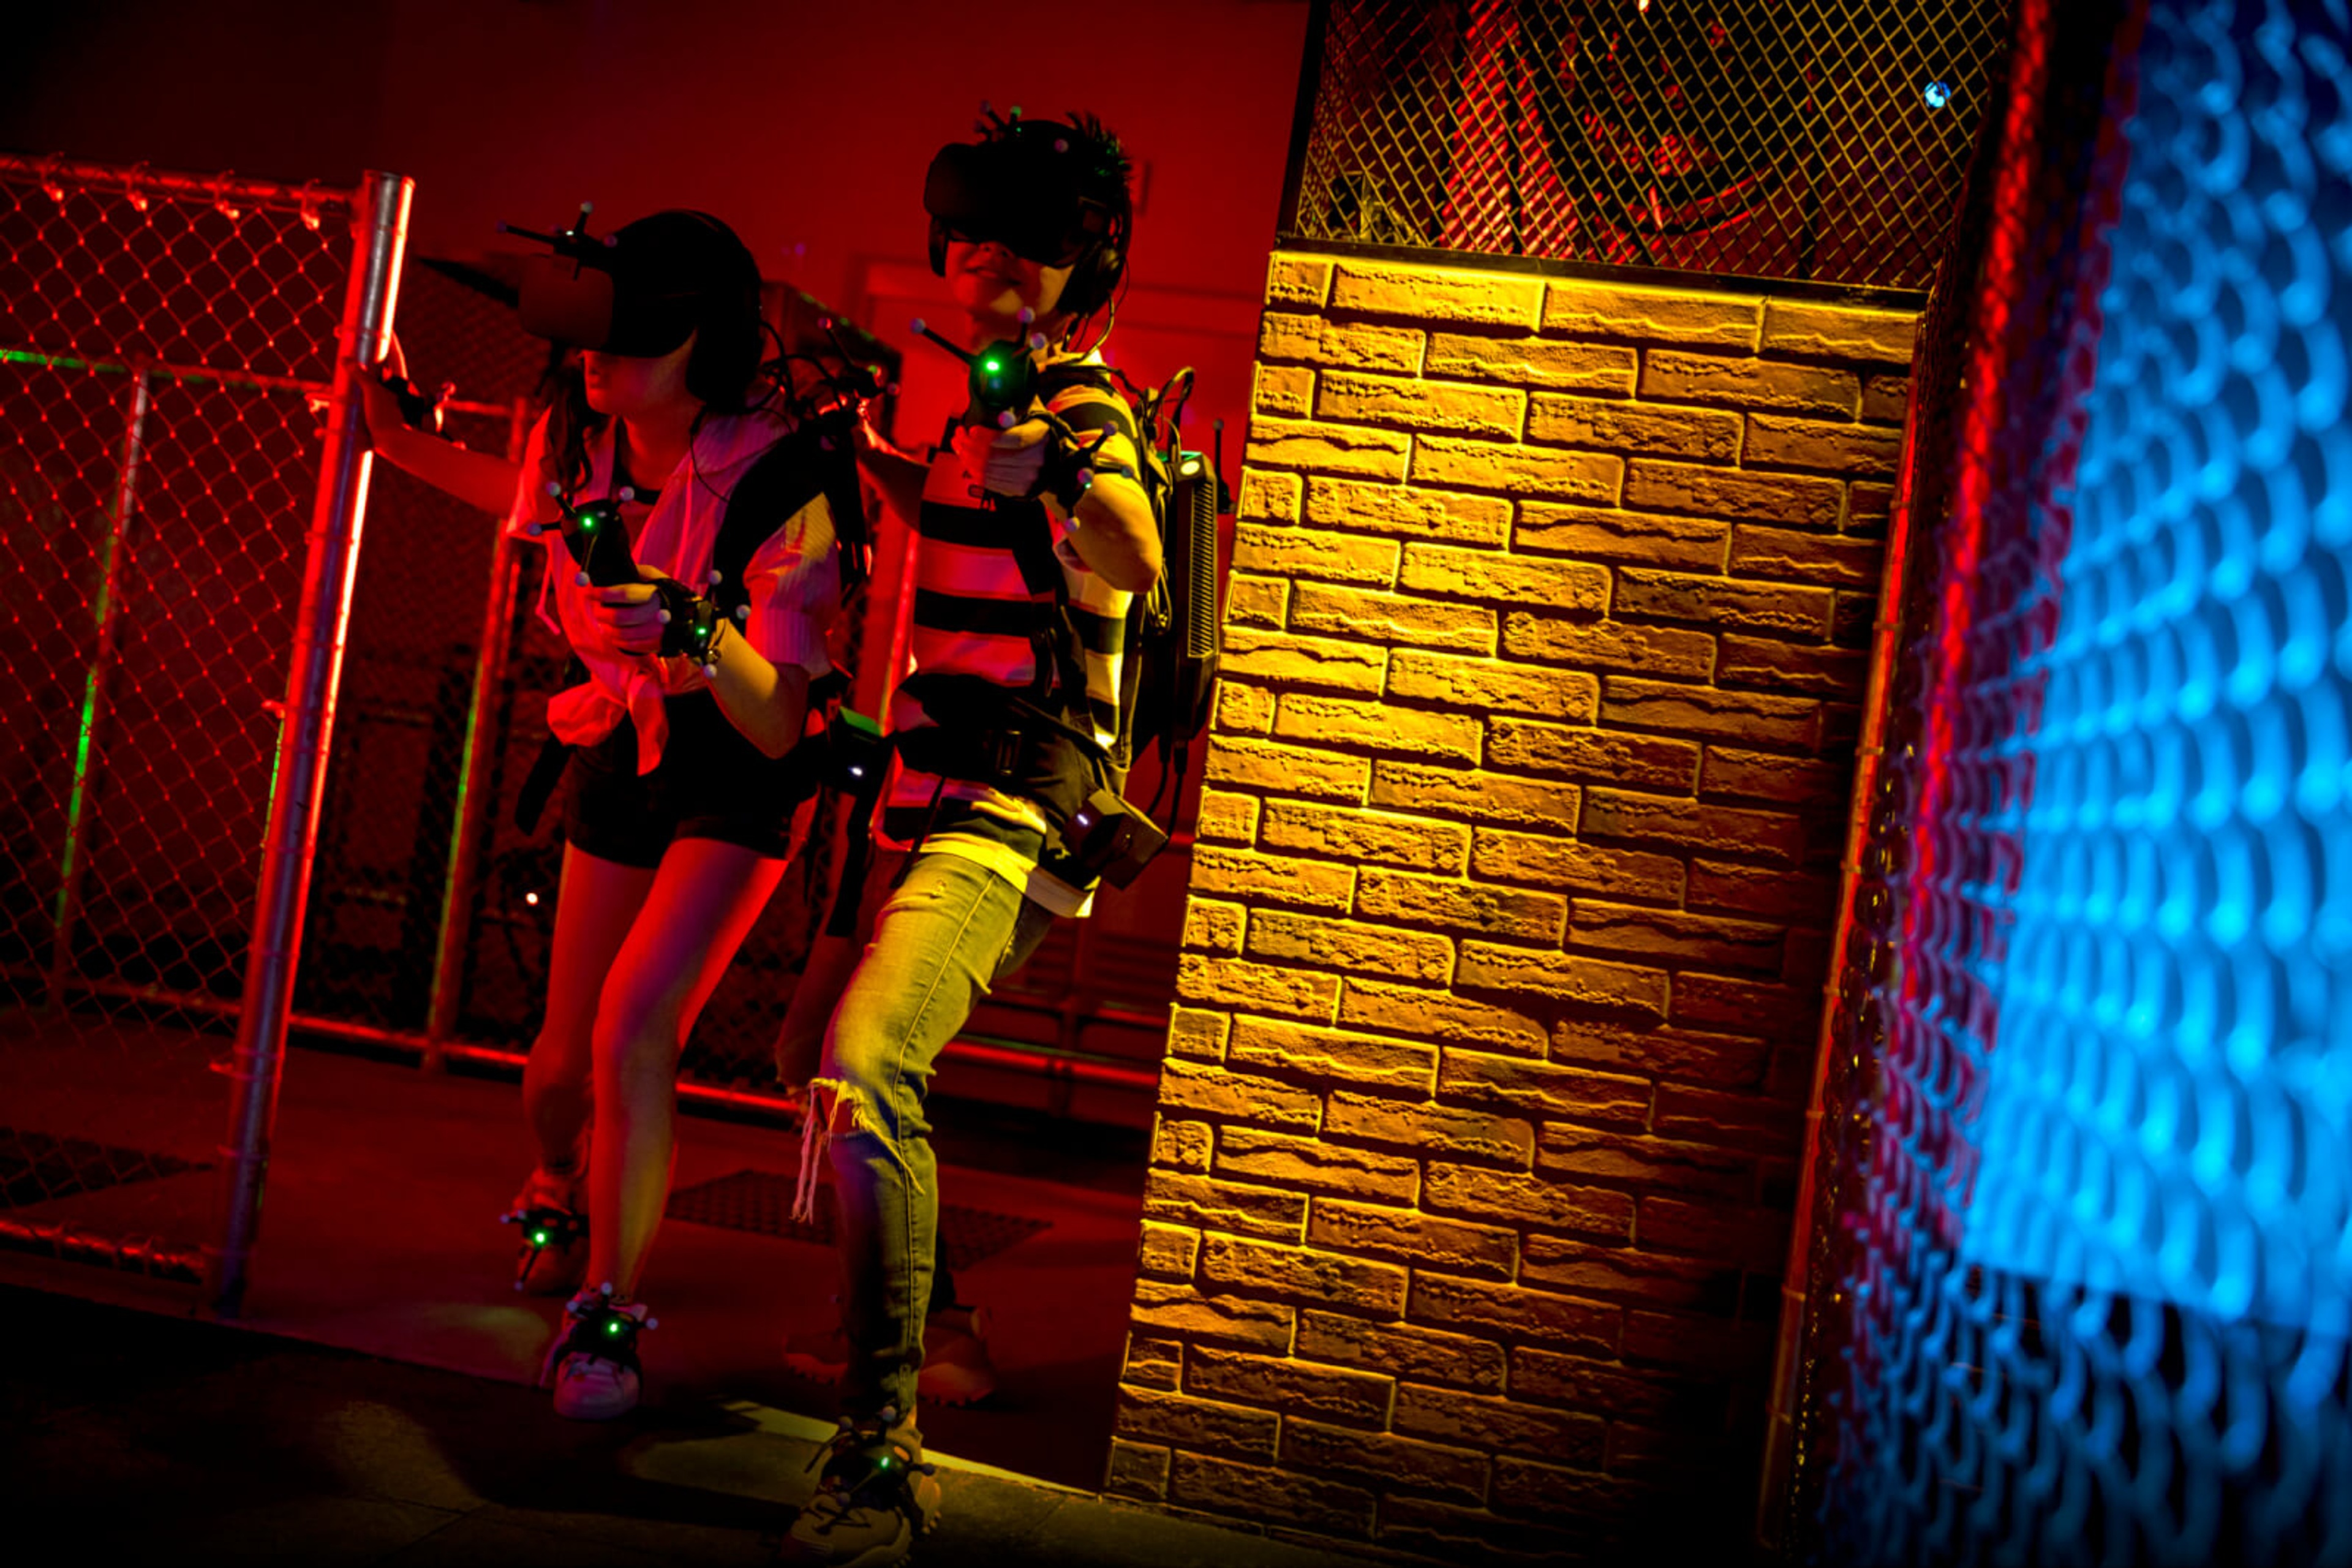 Children playing VR assault course games wearing headsets and walking through a industrial environment with red lighting